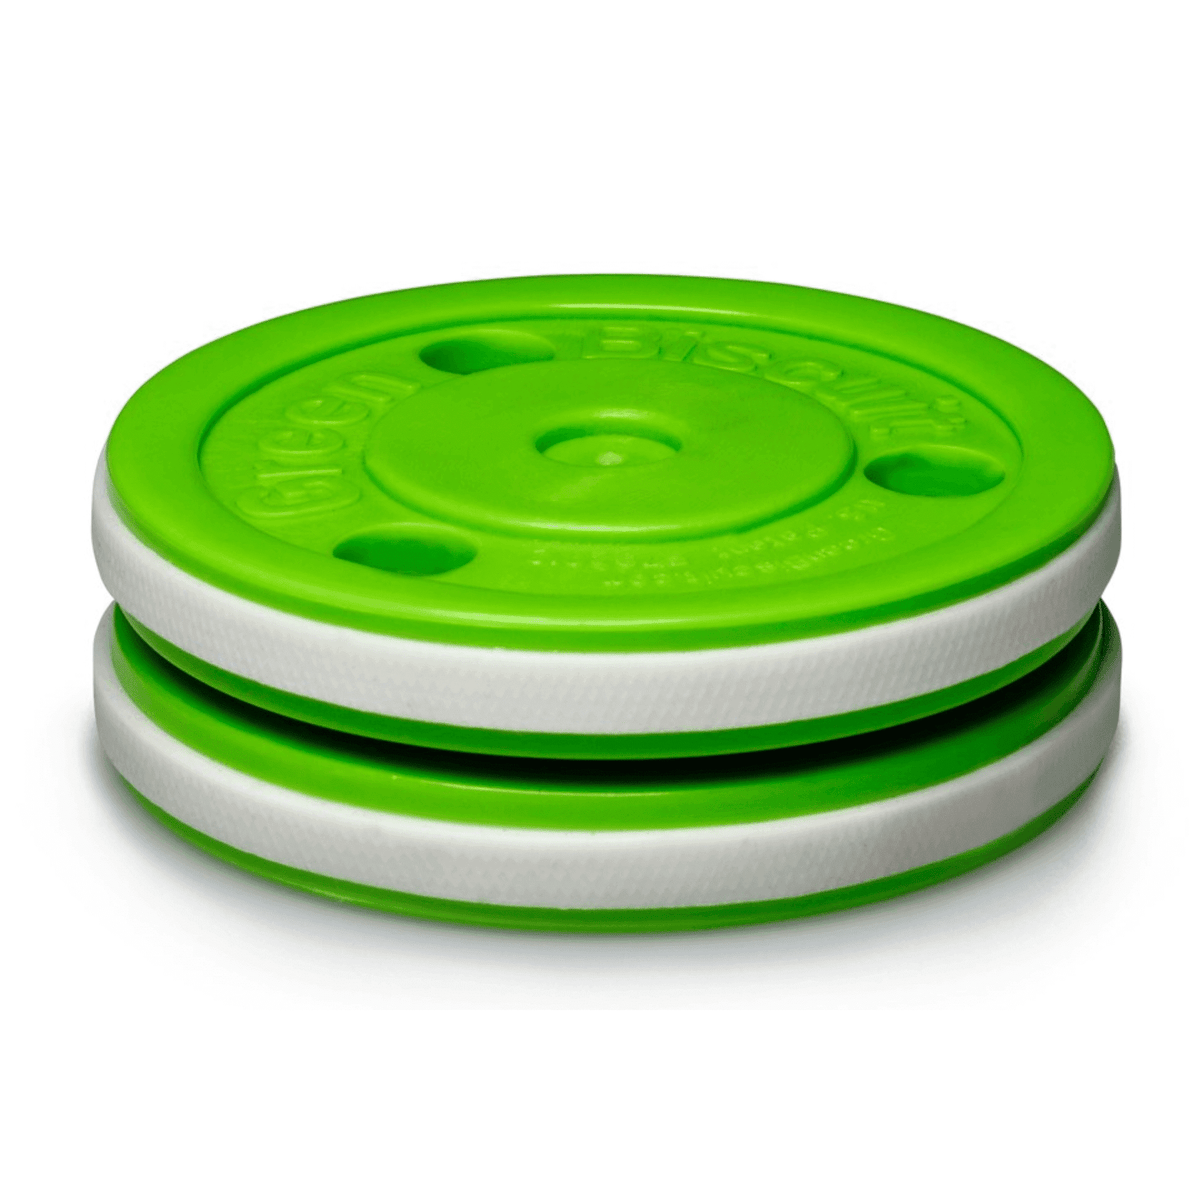 Green Biscuit PRO Training Puck